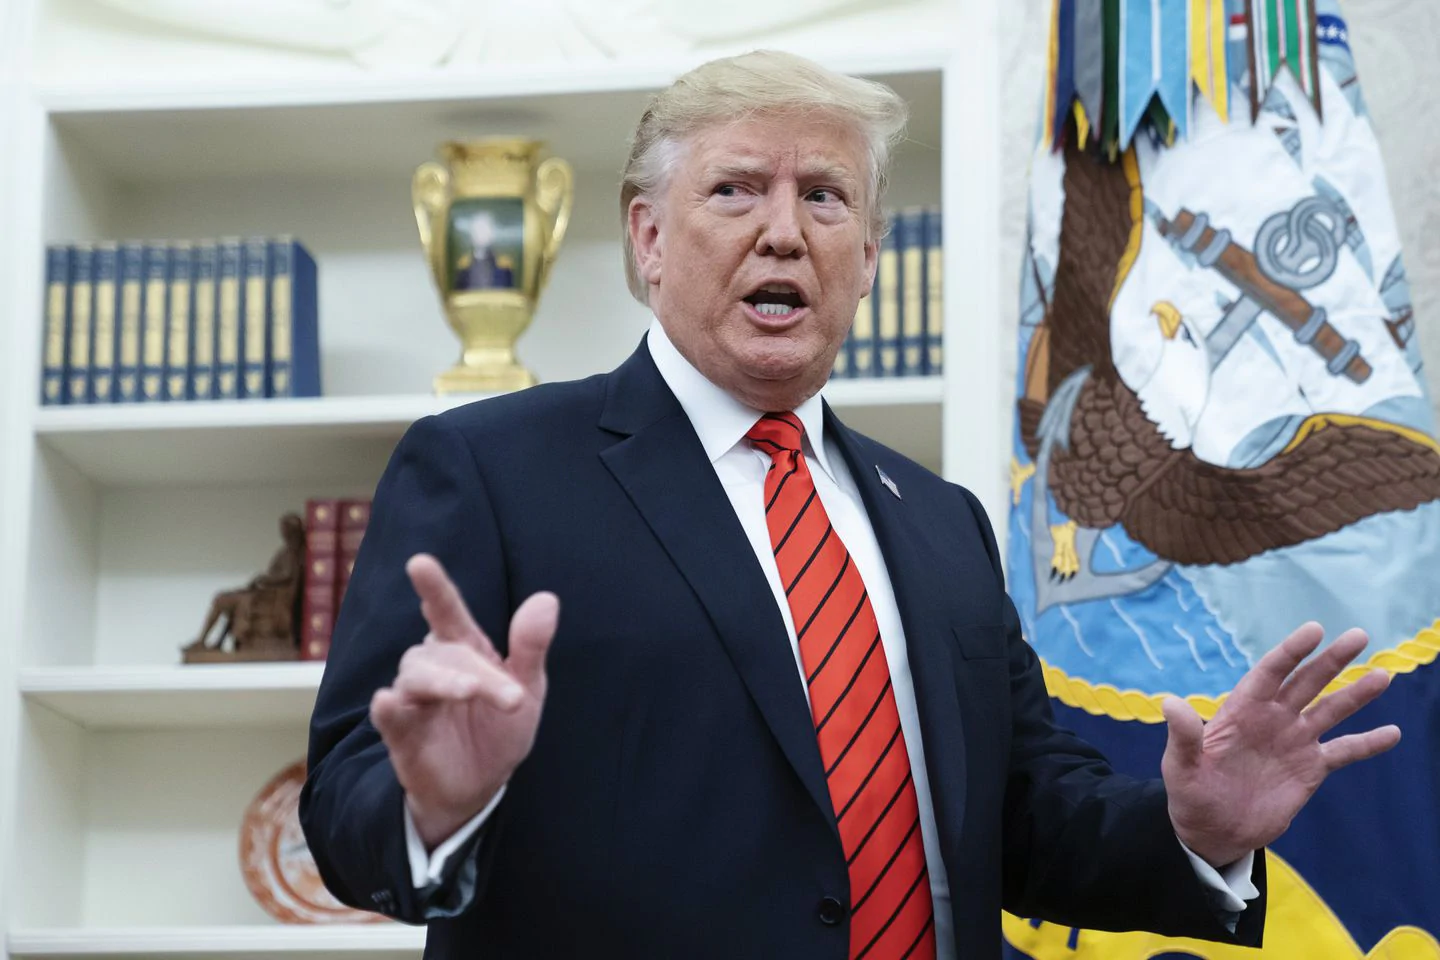 Live updates: Trump dares Democrats to ‘try to impeach this’ as he reminds them of 2016 support